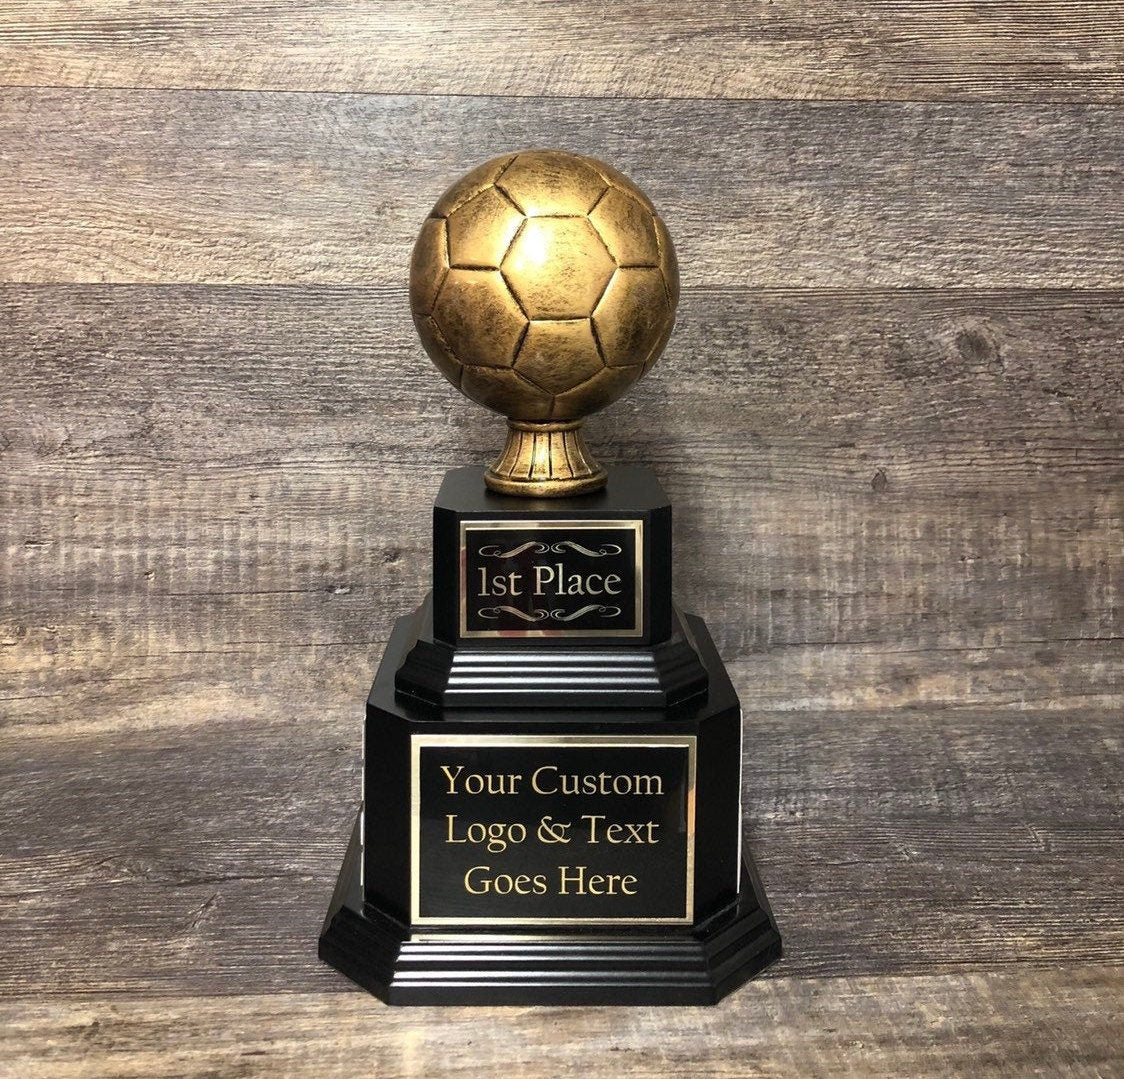 Soccer Trophy Fantasy Soccer Football League Trophy Antique Gold Soccer Ball 6 or 12 Year Perpetual Championship League Award